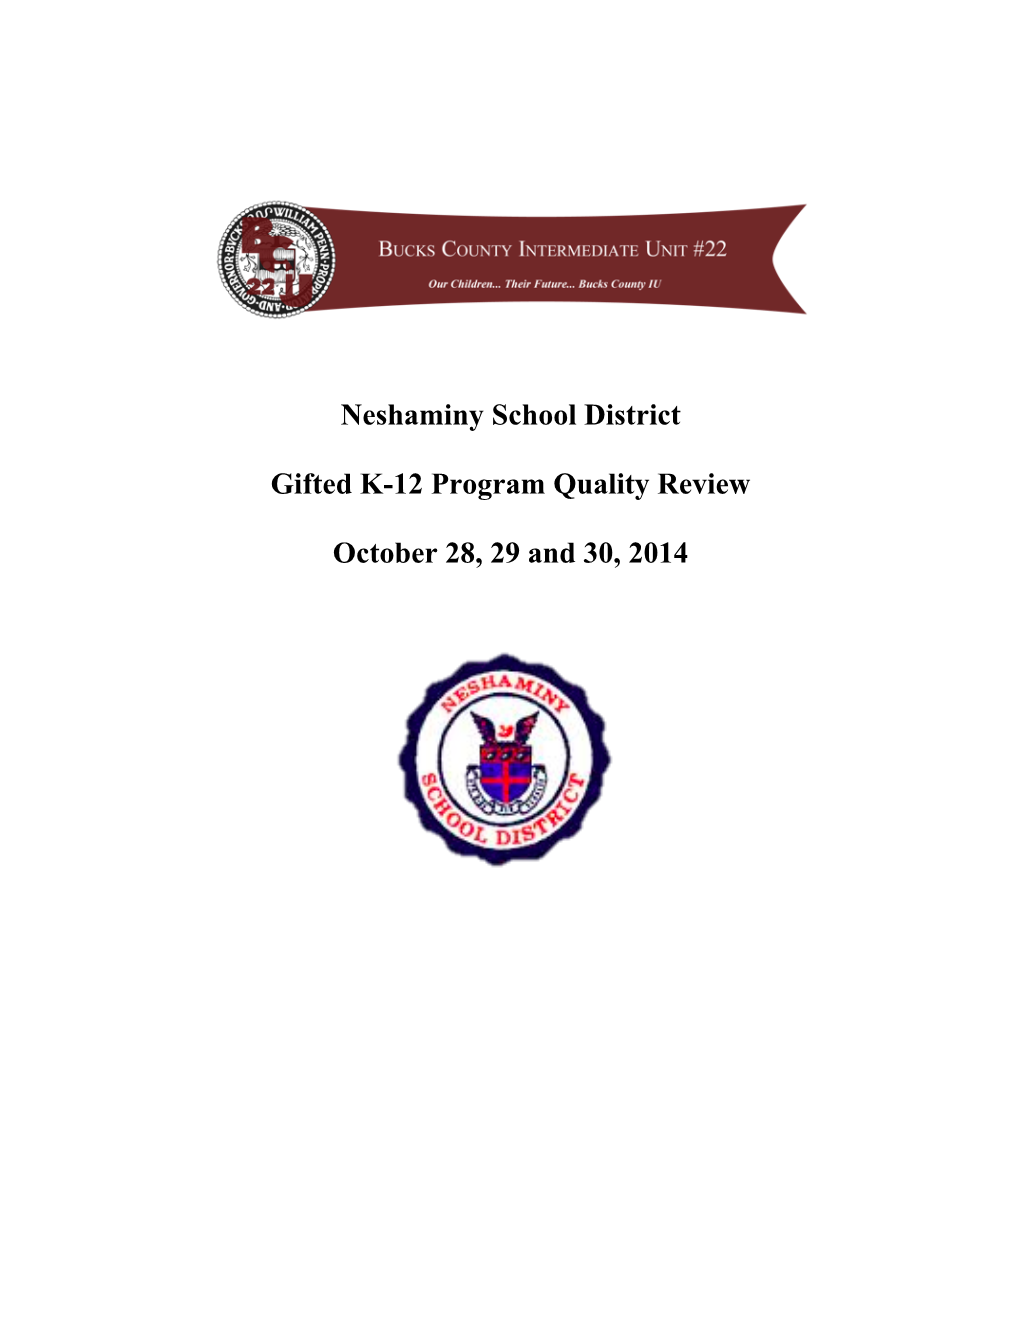 Neshaminy School District Gifted K-12 Program Quality Review October 28, 29 and 30, 2014